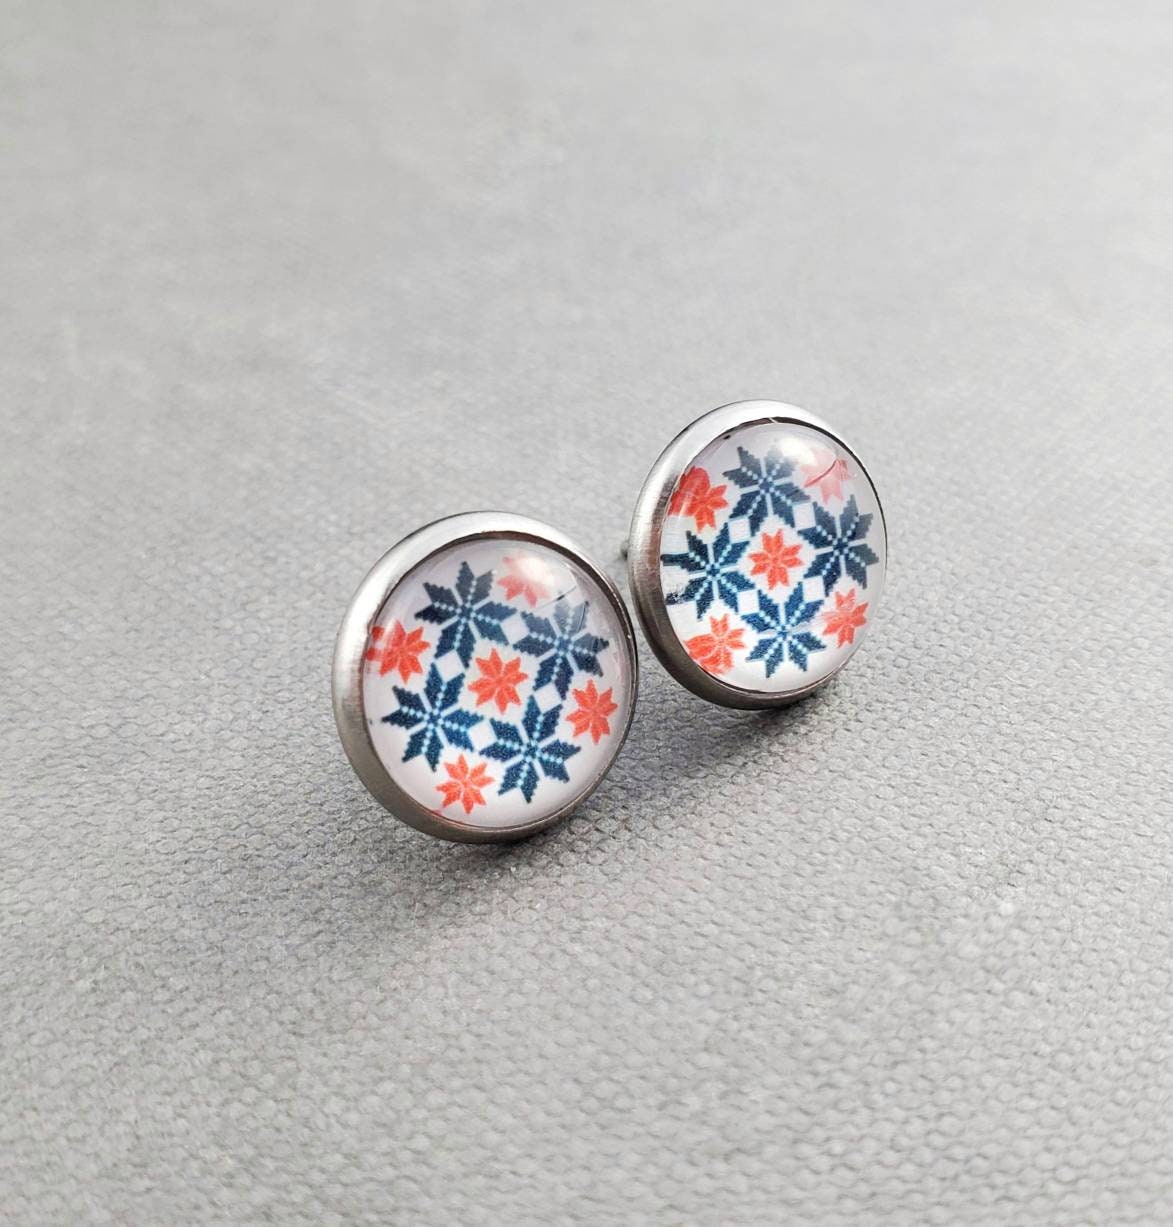 Snowflake Silver Stud Earrings, Hypoallergenic Silver Stud Posts, Holiday Jewelry for Her